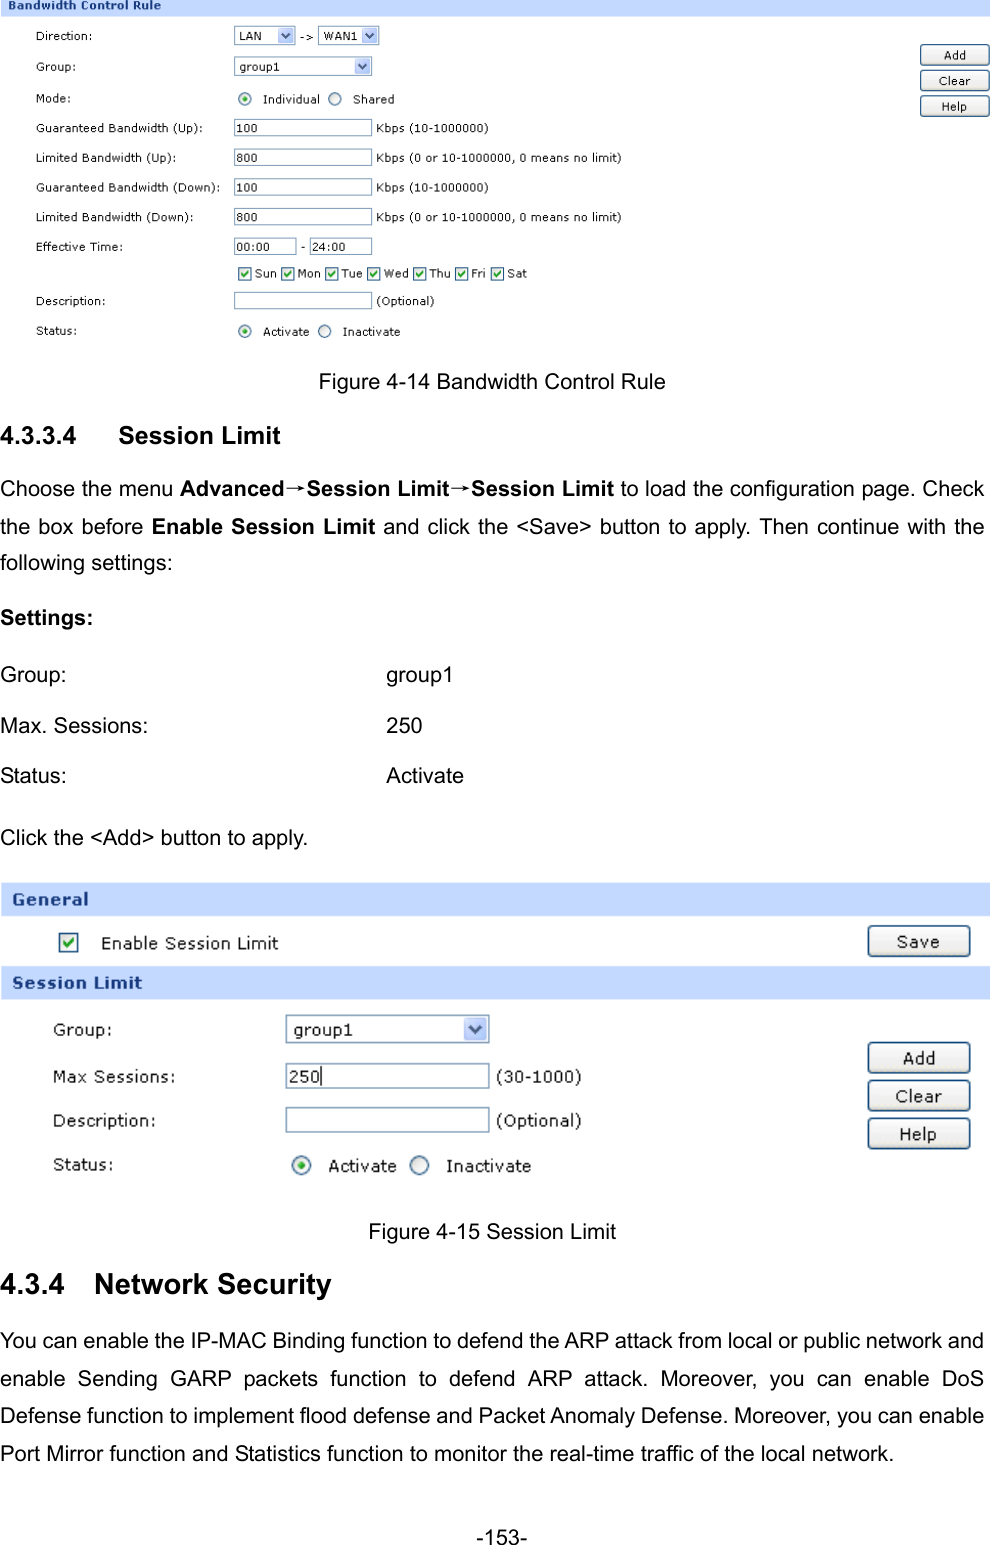  -153-  Figure 4-14 Bandwidth Control Rule 4.3.3.4  Session Limit Choose the menu Advanced→Session Limit→Session Limit to load the configuration page. Check the box before Enable Session Limit and click the &lt;Save&gt; button to apply. Then continue with the following settings: Settings: Group: group1 Max. Sessions:  250 Status: Activate Click the &lt;Add&gt; button to apply.  Figure 4-15 Session Limit 4.3.4  Network Security You can enable the IP-MAC Binding function to defend the ARP attack from local or public network and enable Sending GARP packets function to defend ARP attack. Moreover, you can enable DoS Defense function to implement flood defense and Packet Anomaly Defense. Moreover, you can enable Port Mirror function and Statistics function to monitor the real-time traffic of the local network.   